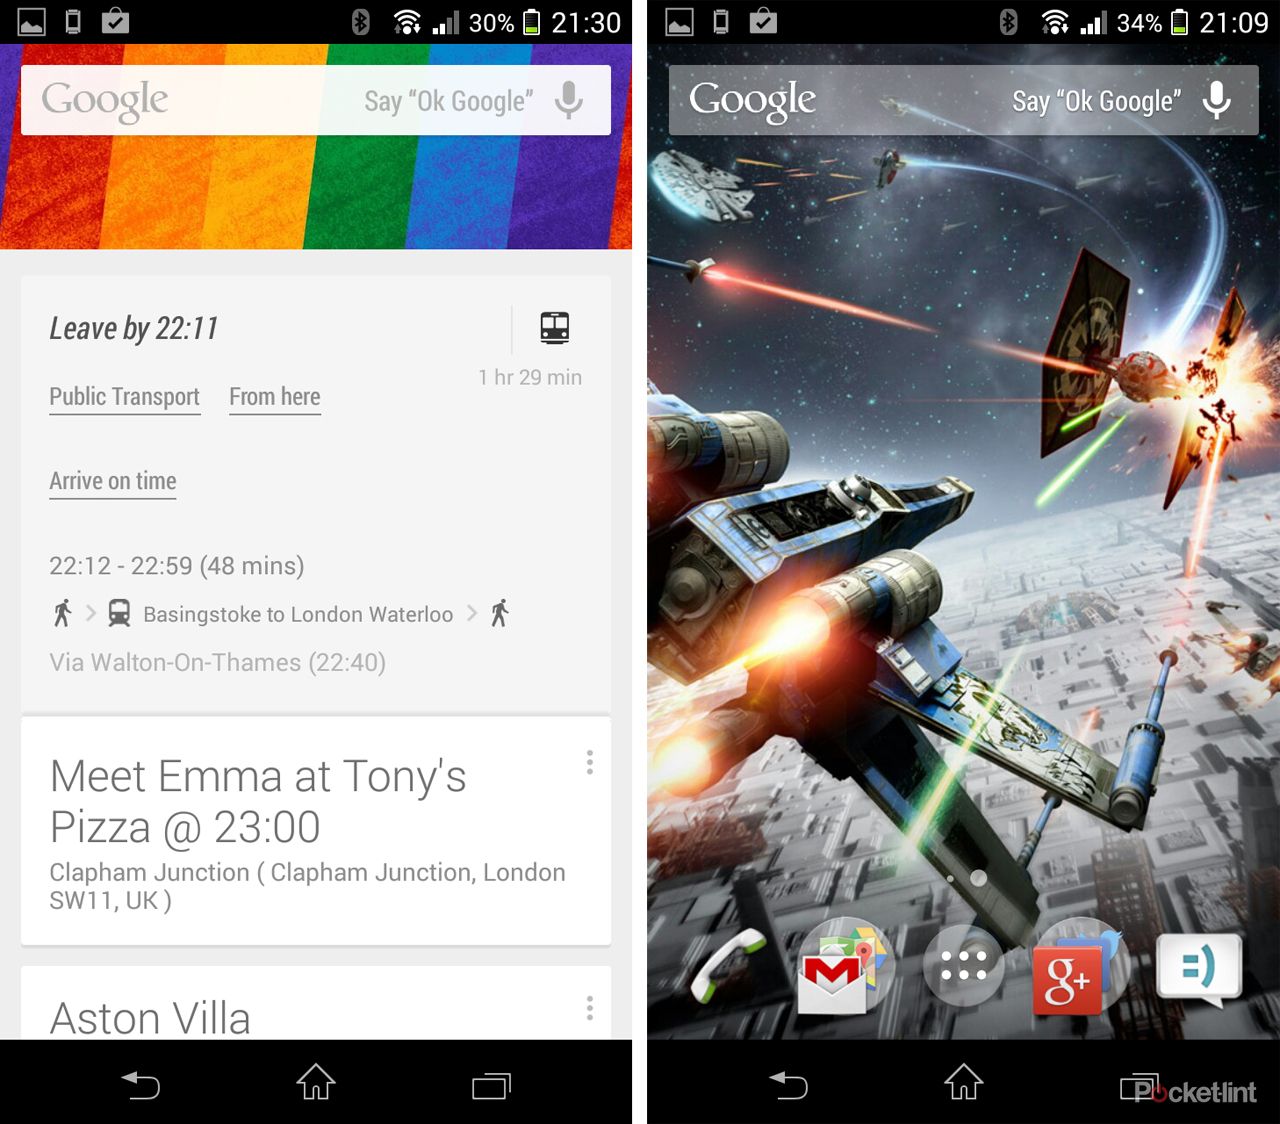 google search update enables ok google in uk and canada enhanced time to leave options image 2